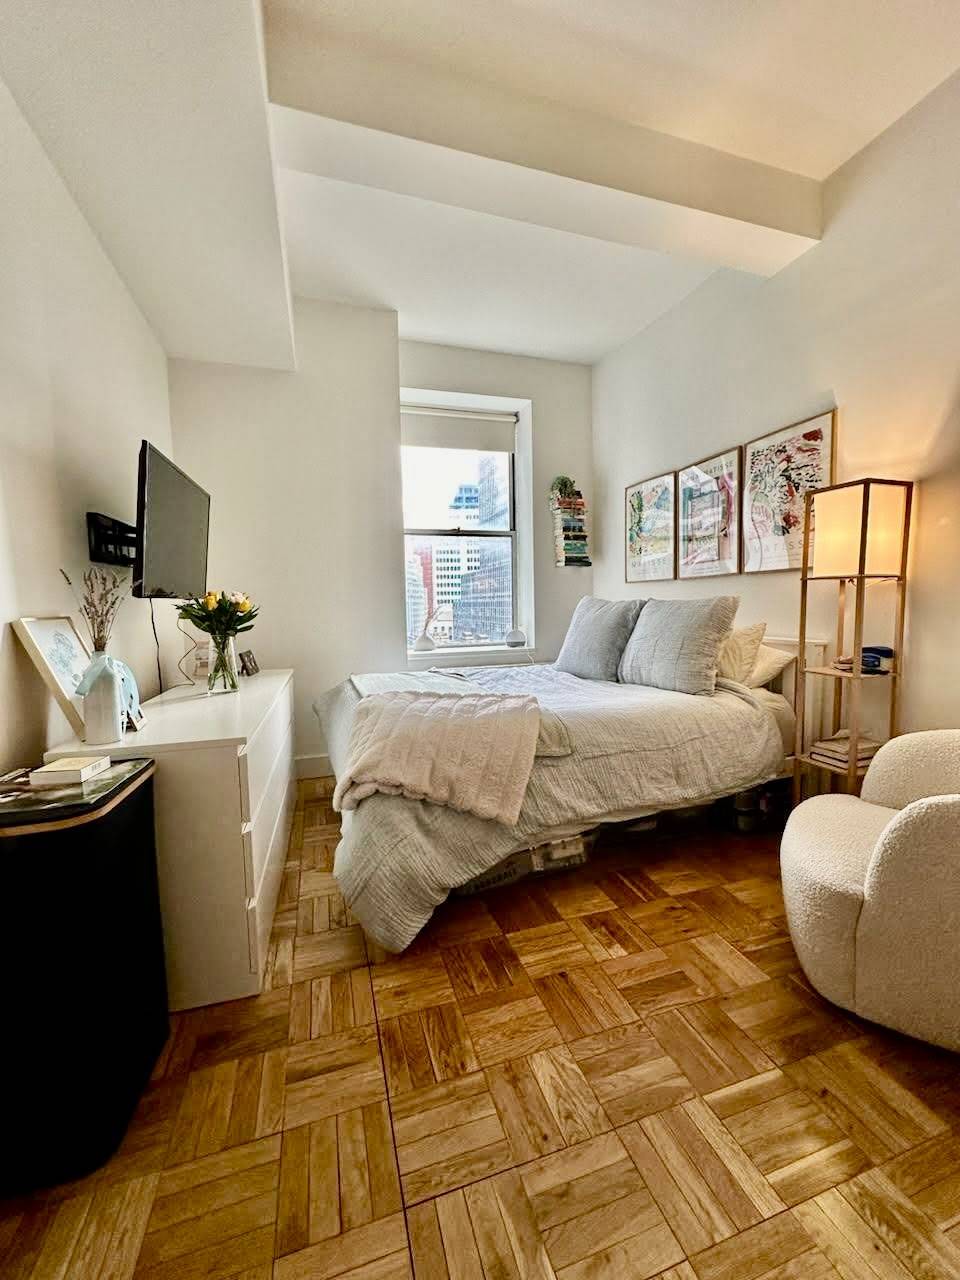 Rent stabilized Studio with W D in unit located in a luxury building.